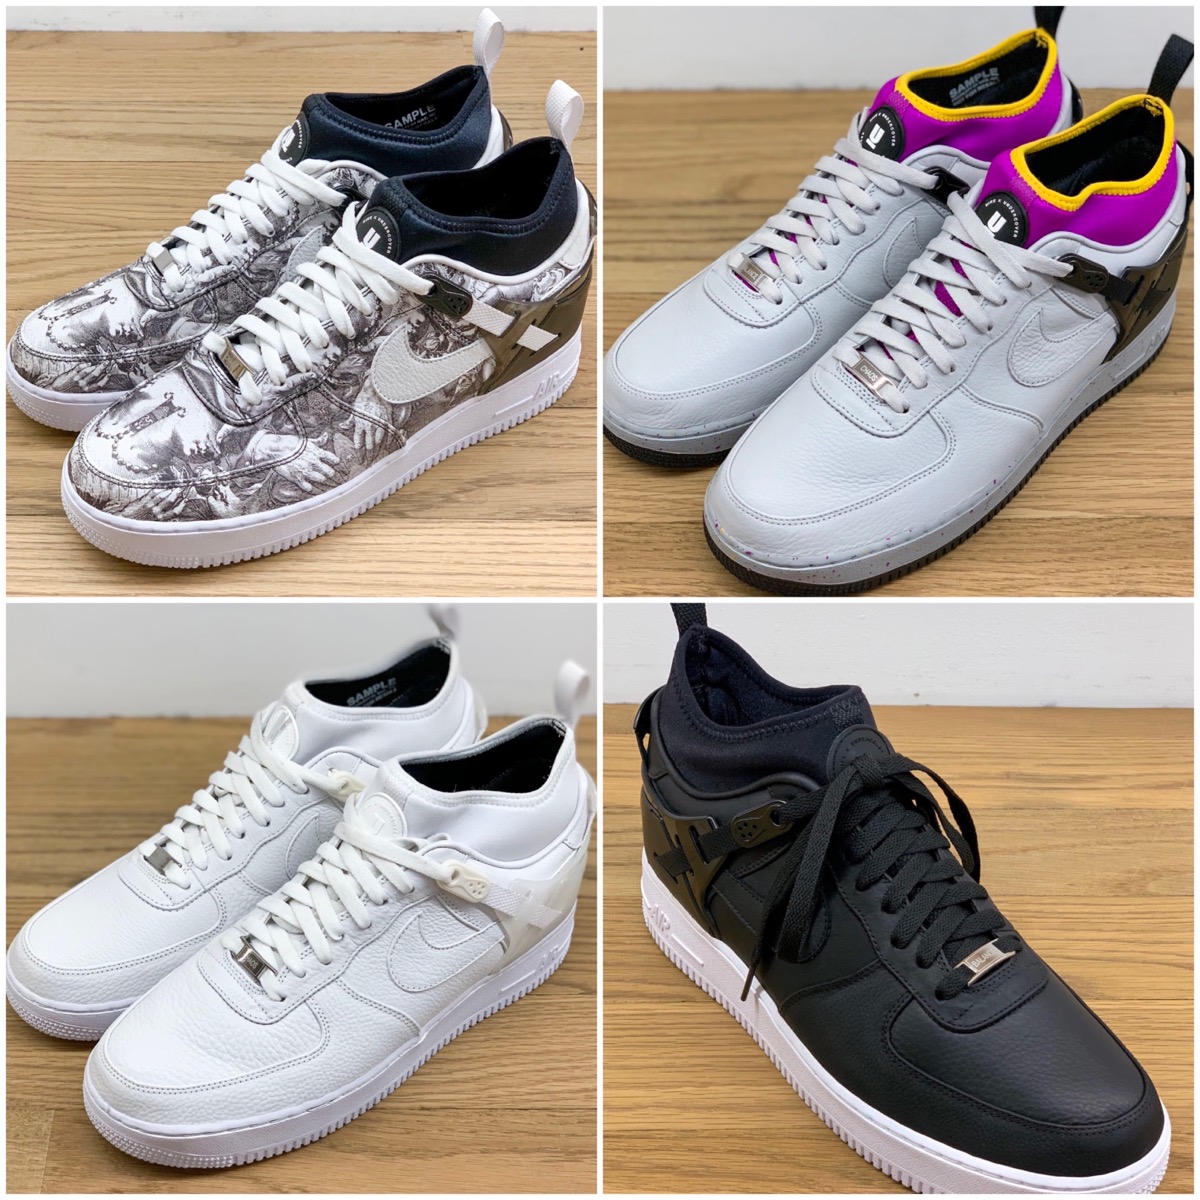 UNDERCOVER × Nike Air Force Low SP GTX が国内10月8日／10月12日に発売予定 ［DQ7558-101  DQ7558-002 DQ7558-001］ UP TO DATE